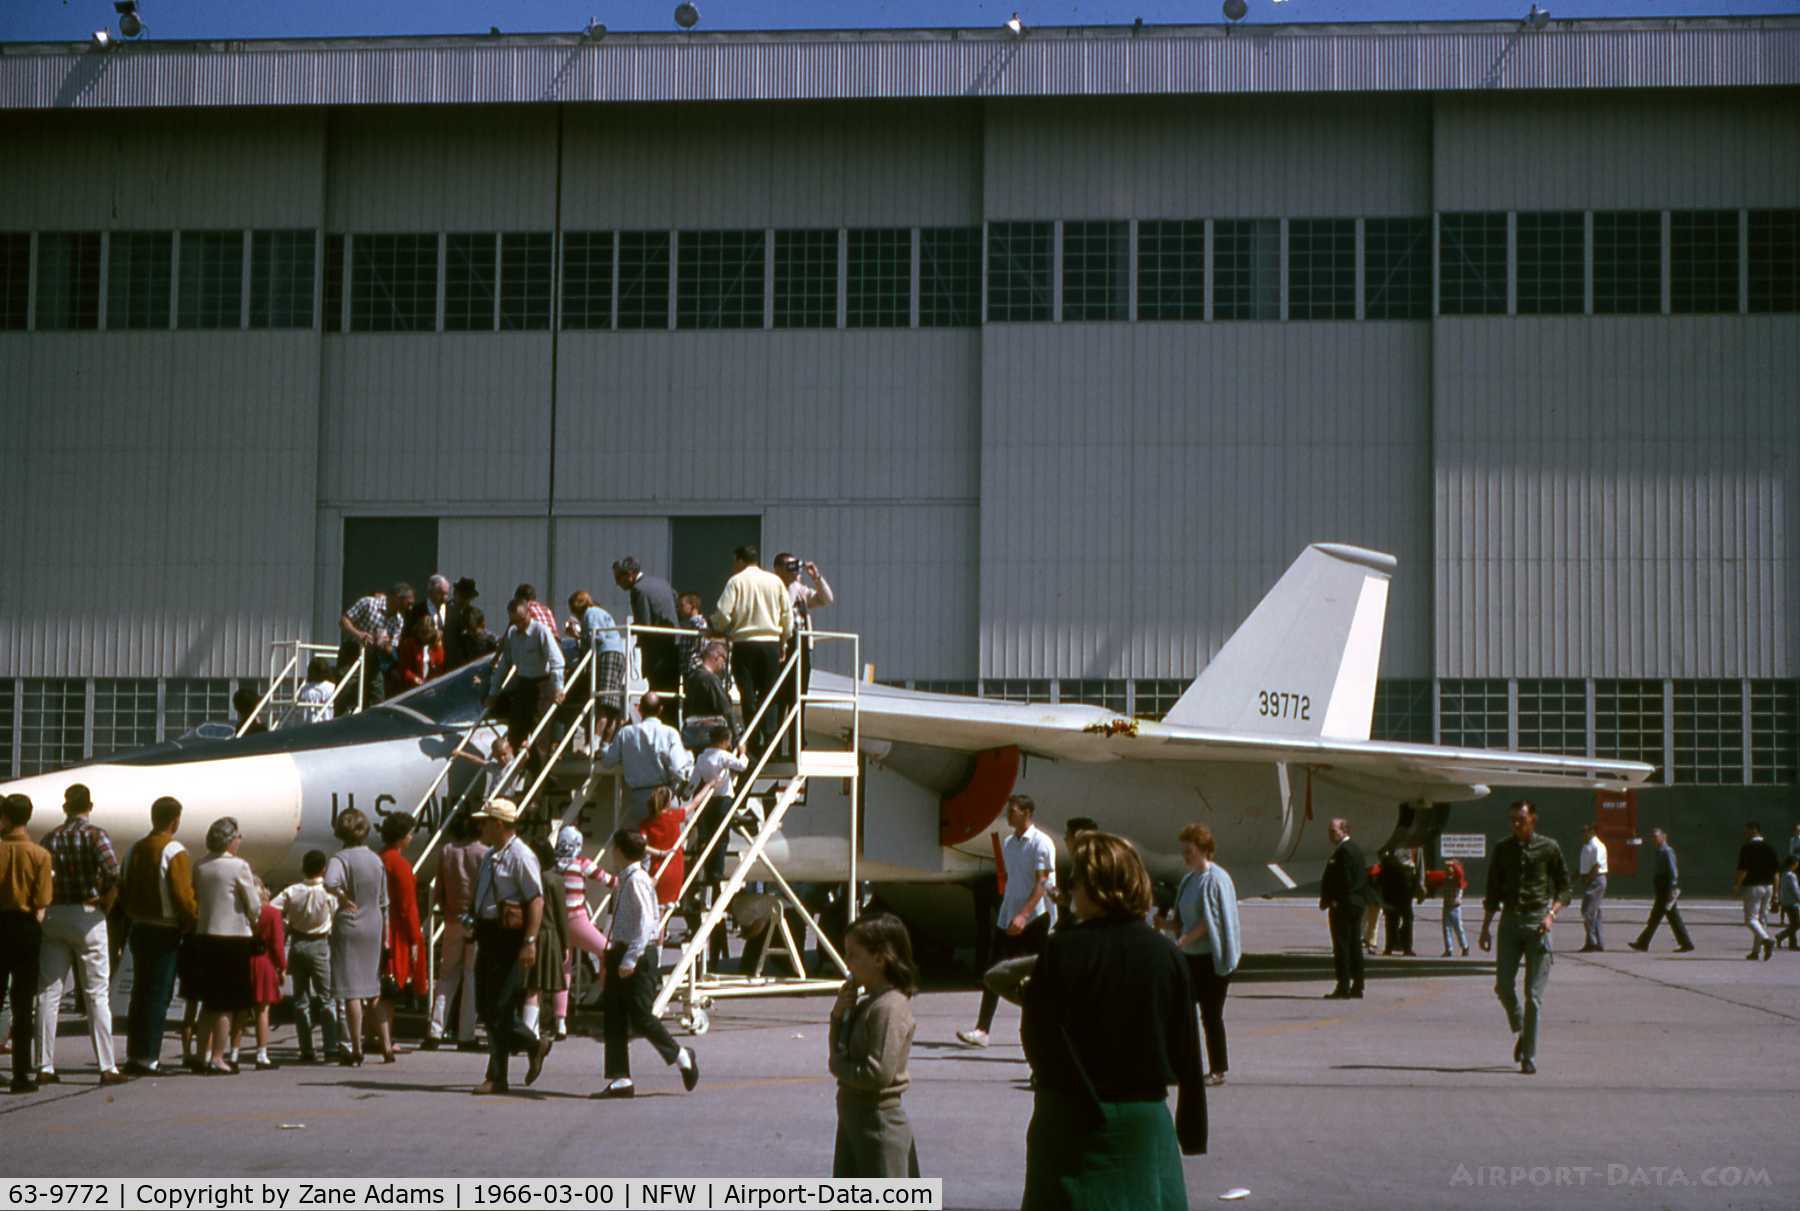 63-9772, 1963 General Dynamics F-111A Aardvark C/N A1-07, 7th F-111 produced - Used for weapons testing, then ground training. May have been scrapped at Sheppard AFB - Taken at 1966 Air Force Assn Airshow, Carswell AFB - Photo By John Williams - published with permission.